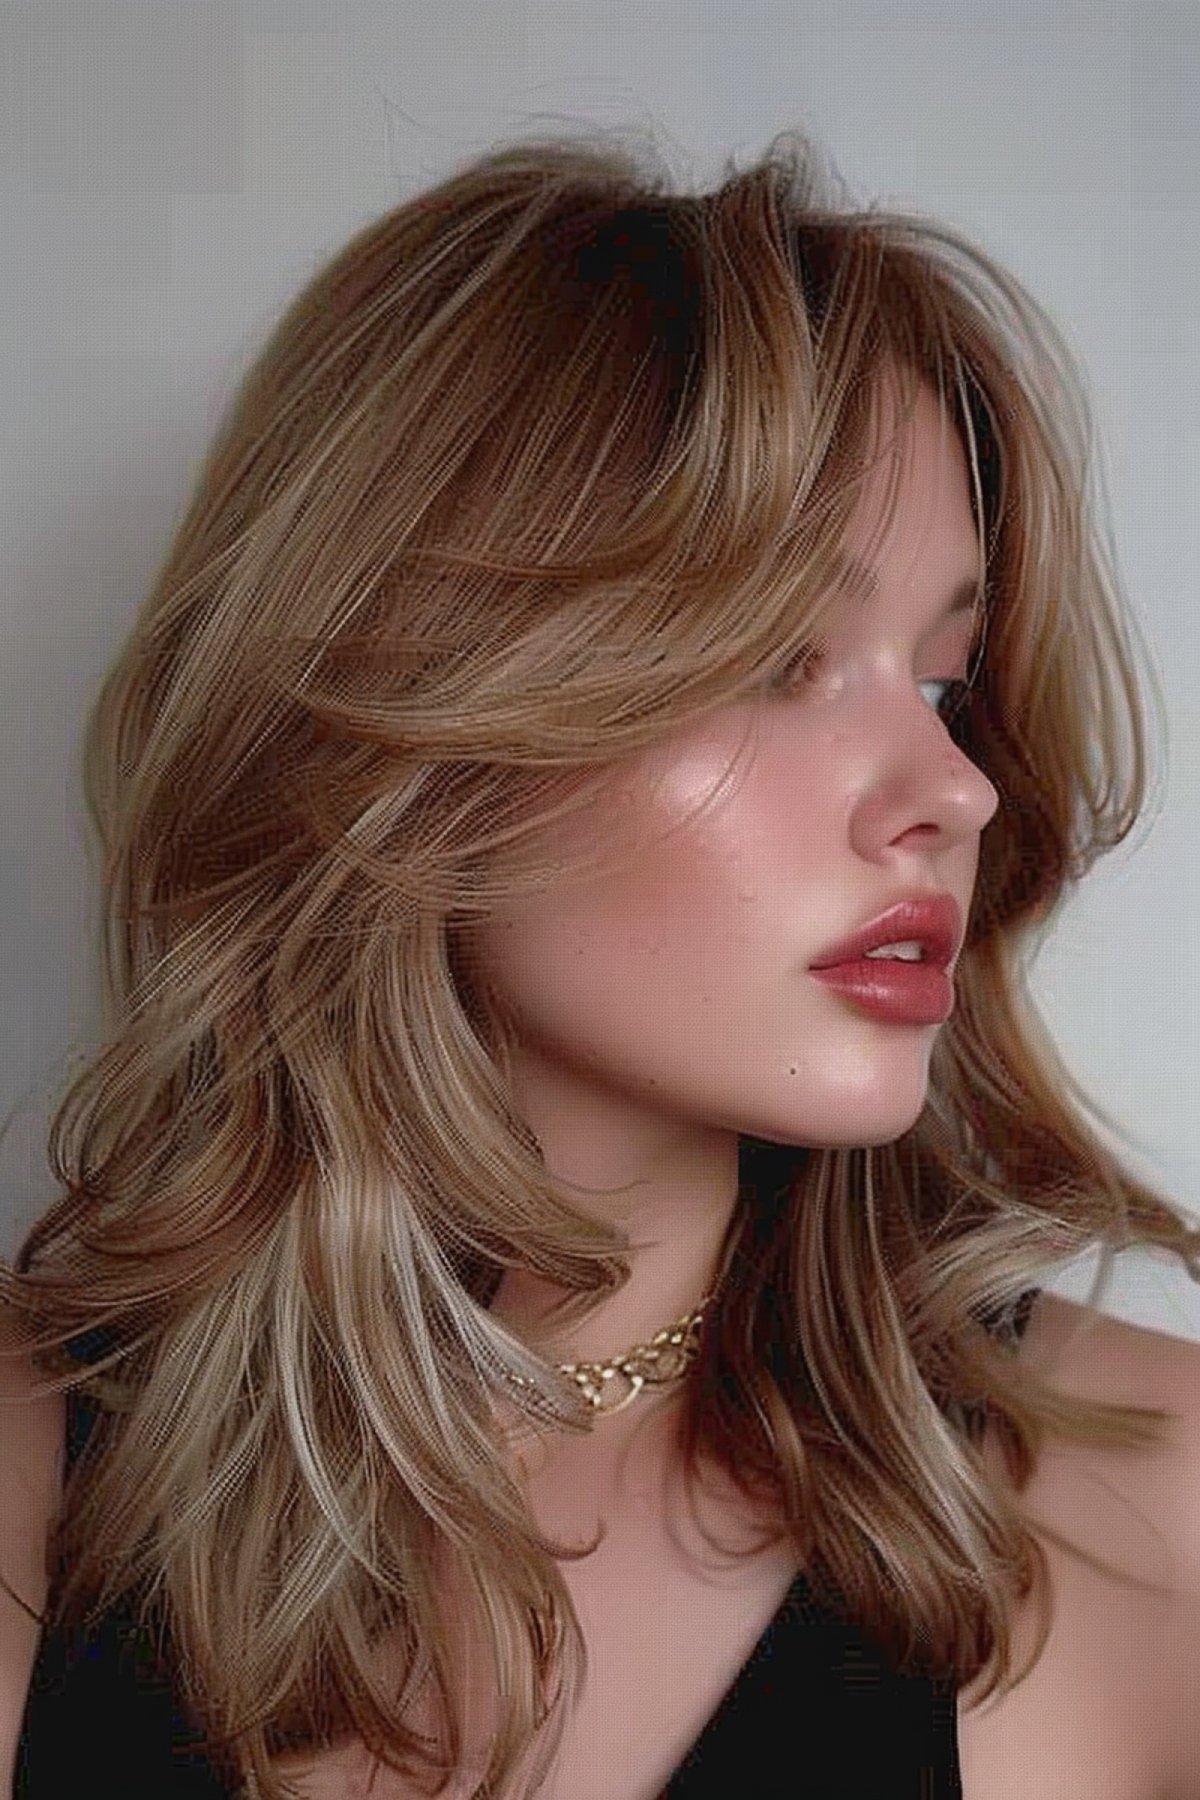 Fox cut hairstyle with blonde waves and medium layers.